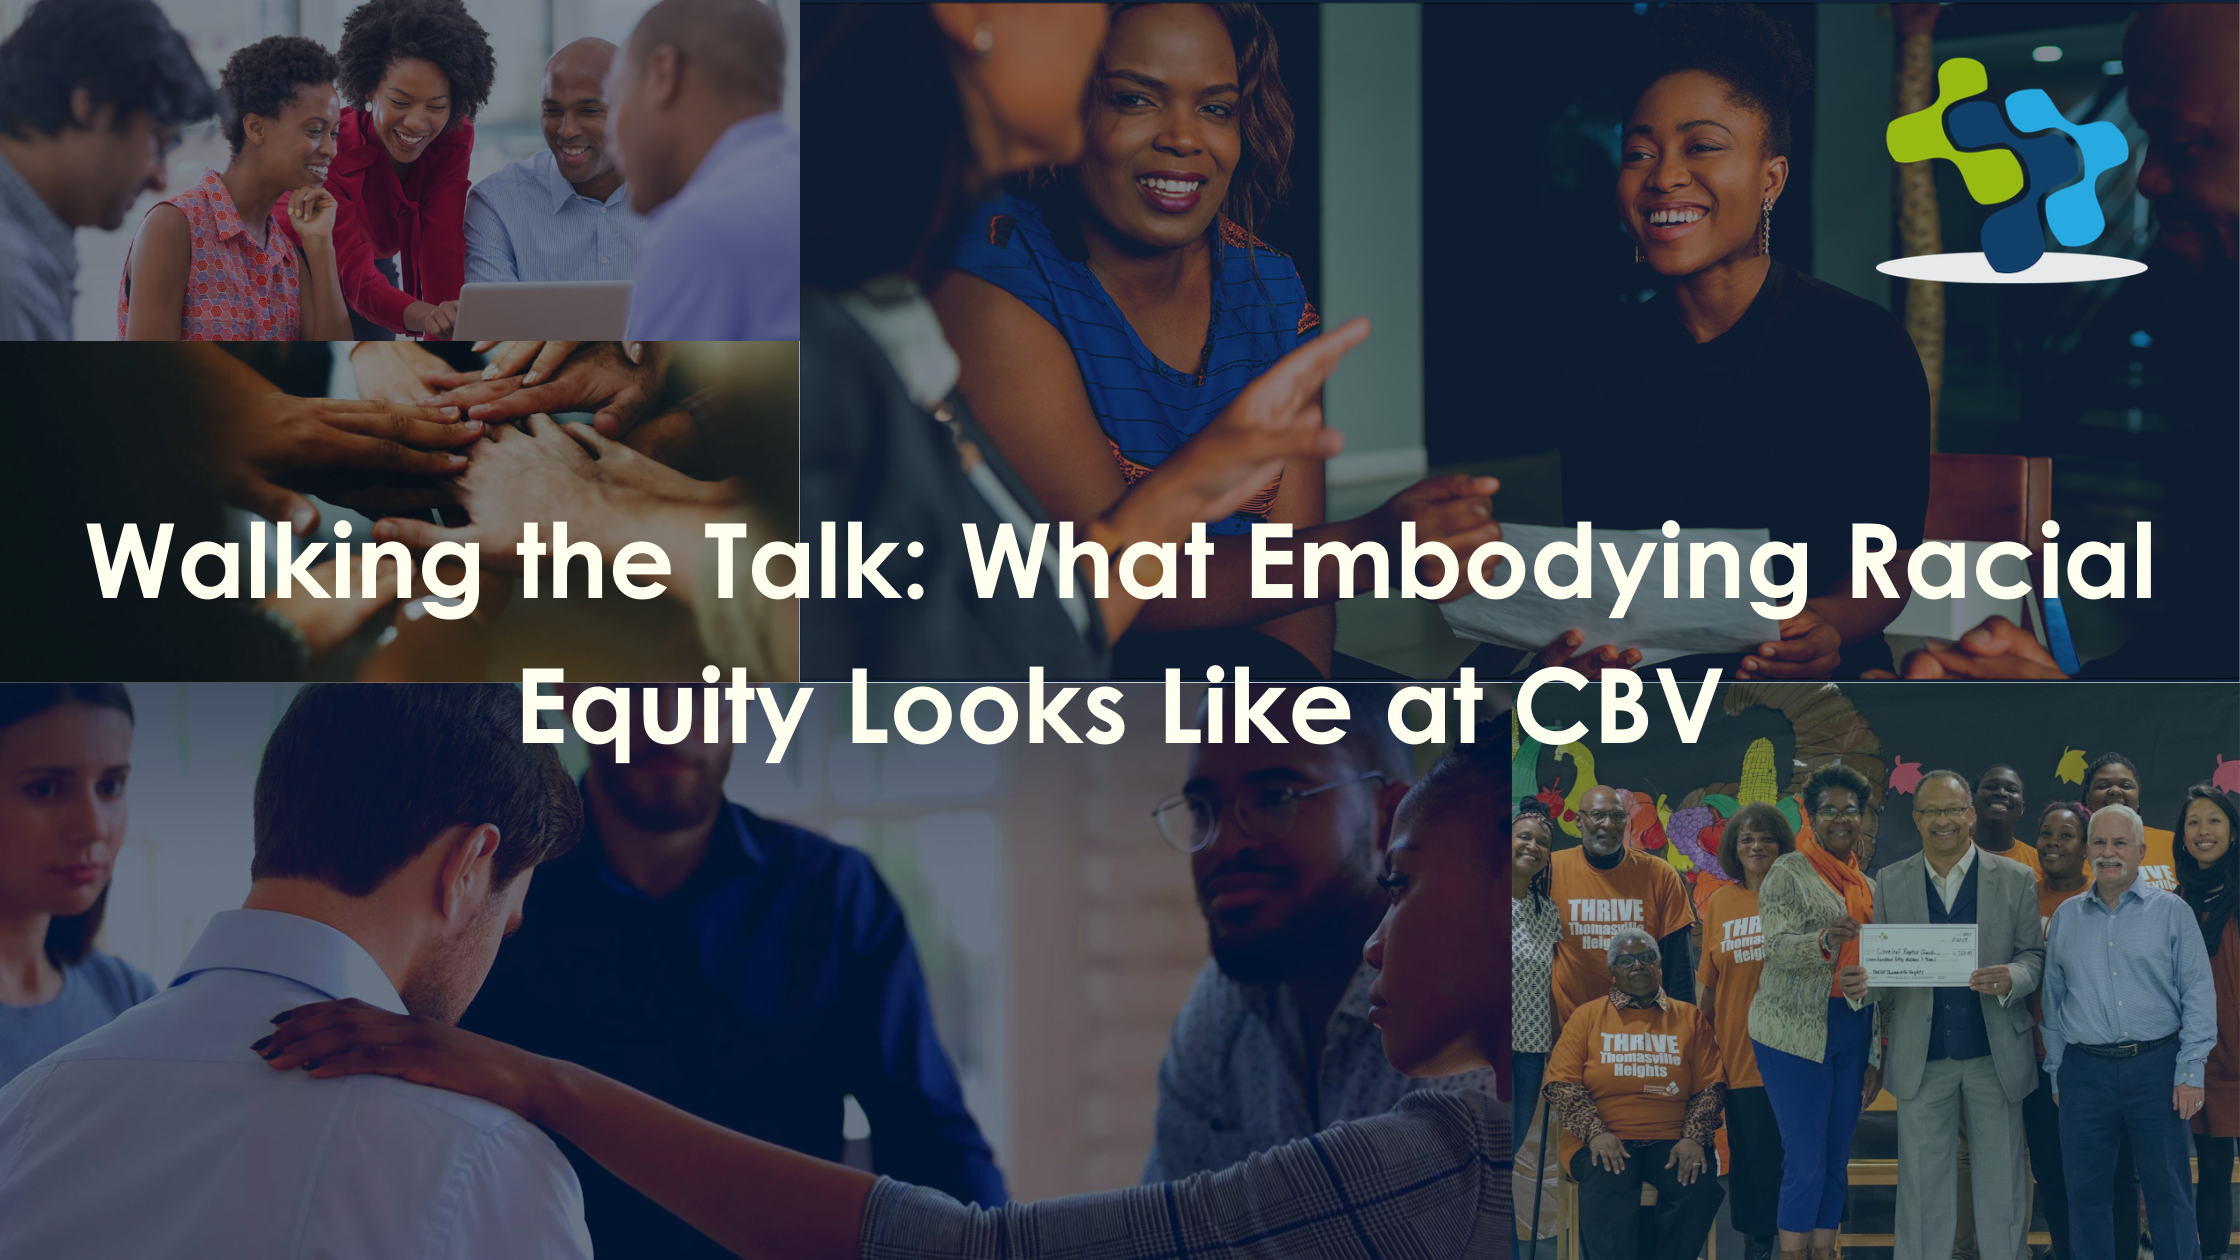 Walking the Talk: What Embodying Racial Equity Looks Like at CBV